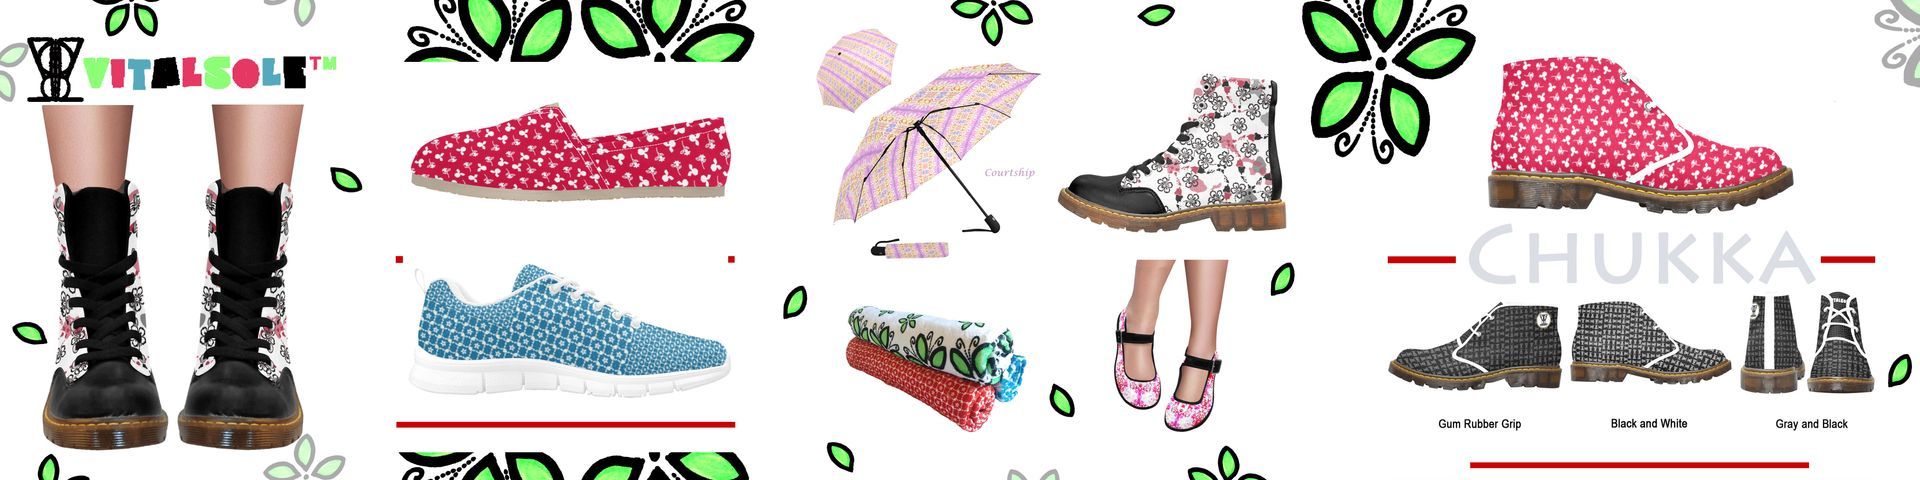 vitalsole banner with vitalsole logo and text in upper left corner below legs in combat boots next to that men's black hibiscus with orange and green camo print canvas classic lace-up shoes center of banner confetti glass plate with combat boots and stone coasters with drink with lime wedge and far right on banner pink chukka boot with grey text  and below black and white vitalsole logo chukka boots whole bannner surrounded by illustrated black outline petals and flowers with green petals